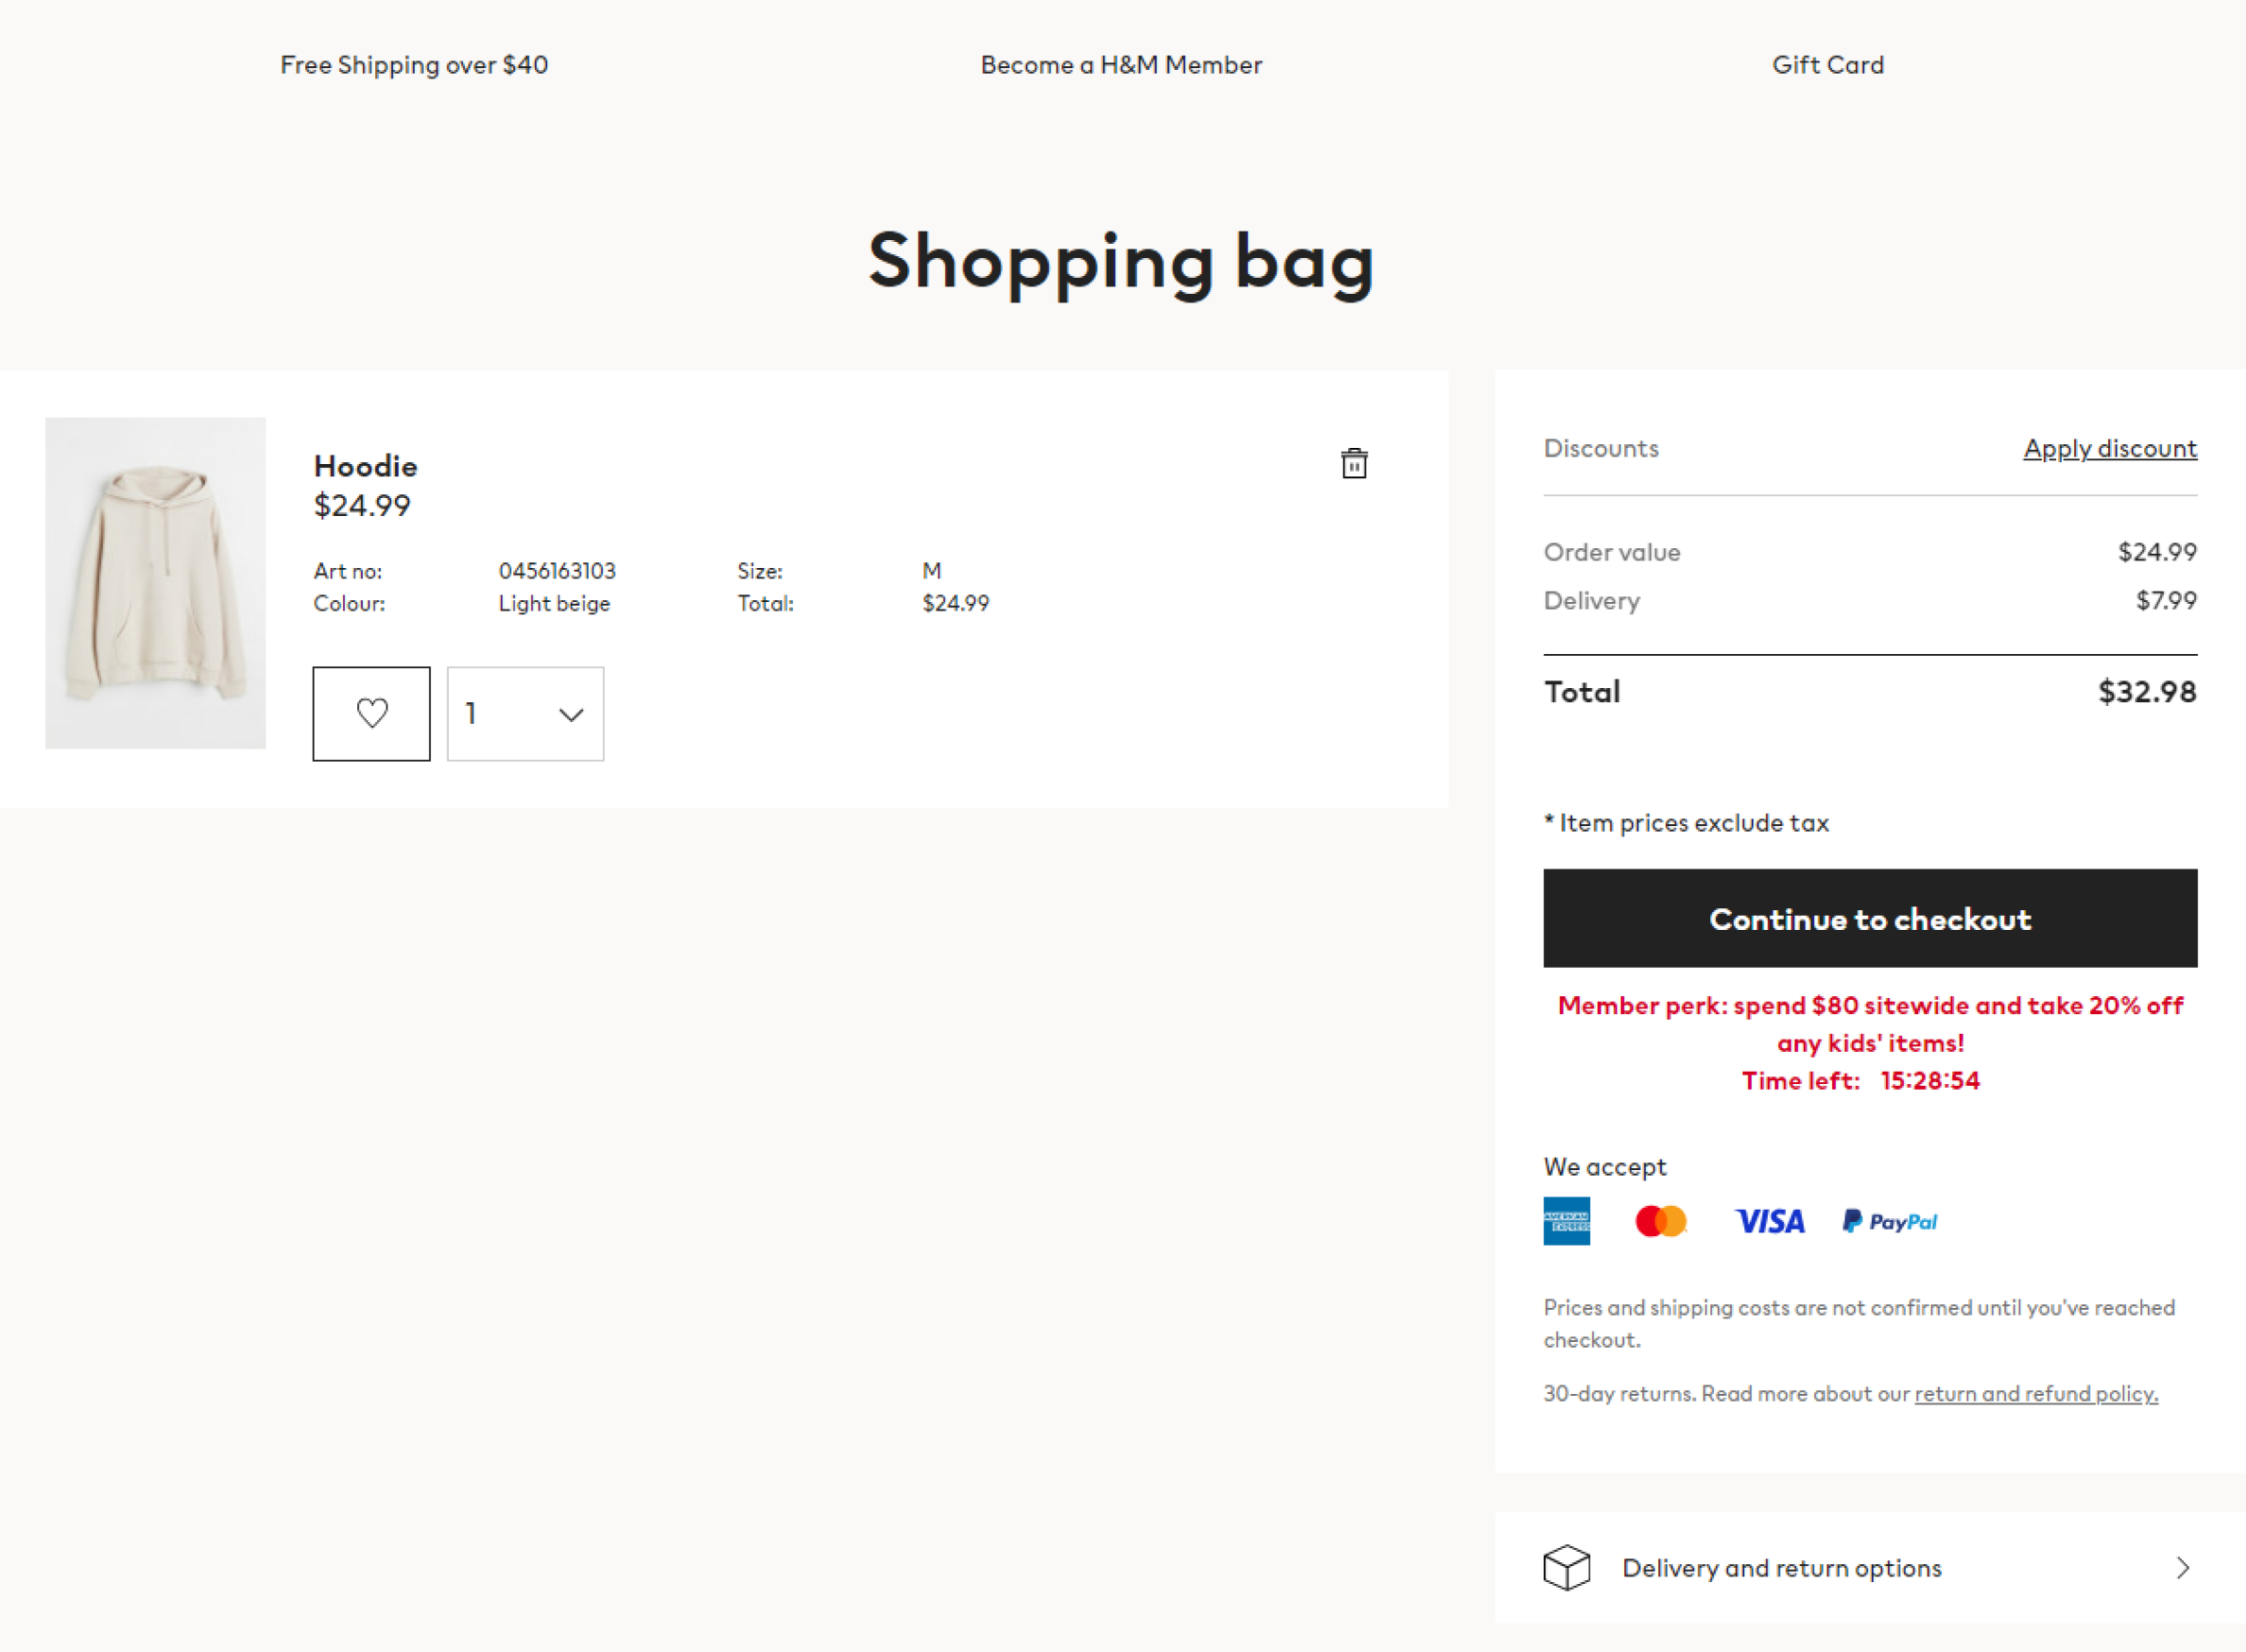 A screenshot of the H&M shopping bag page from their ecommerce site. It shows the item to be purchase, the pretax price, delivery fee and applicable discounts.